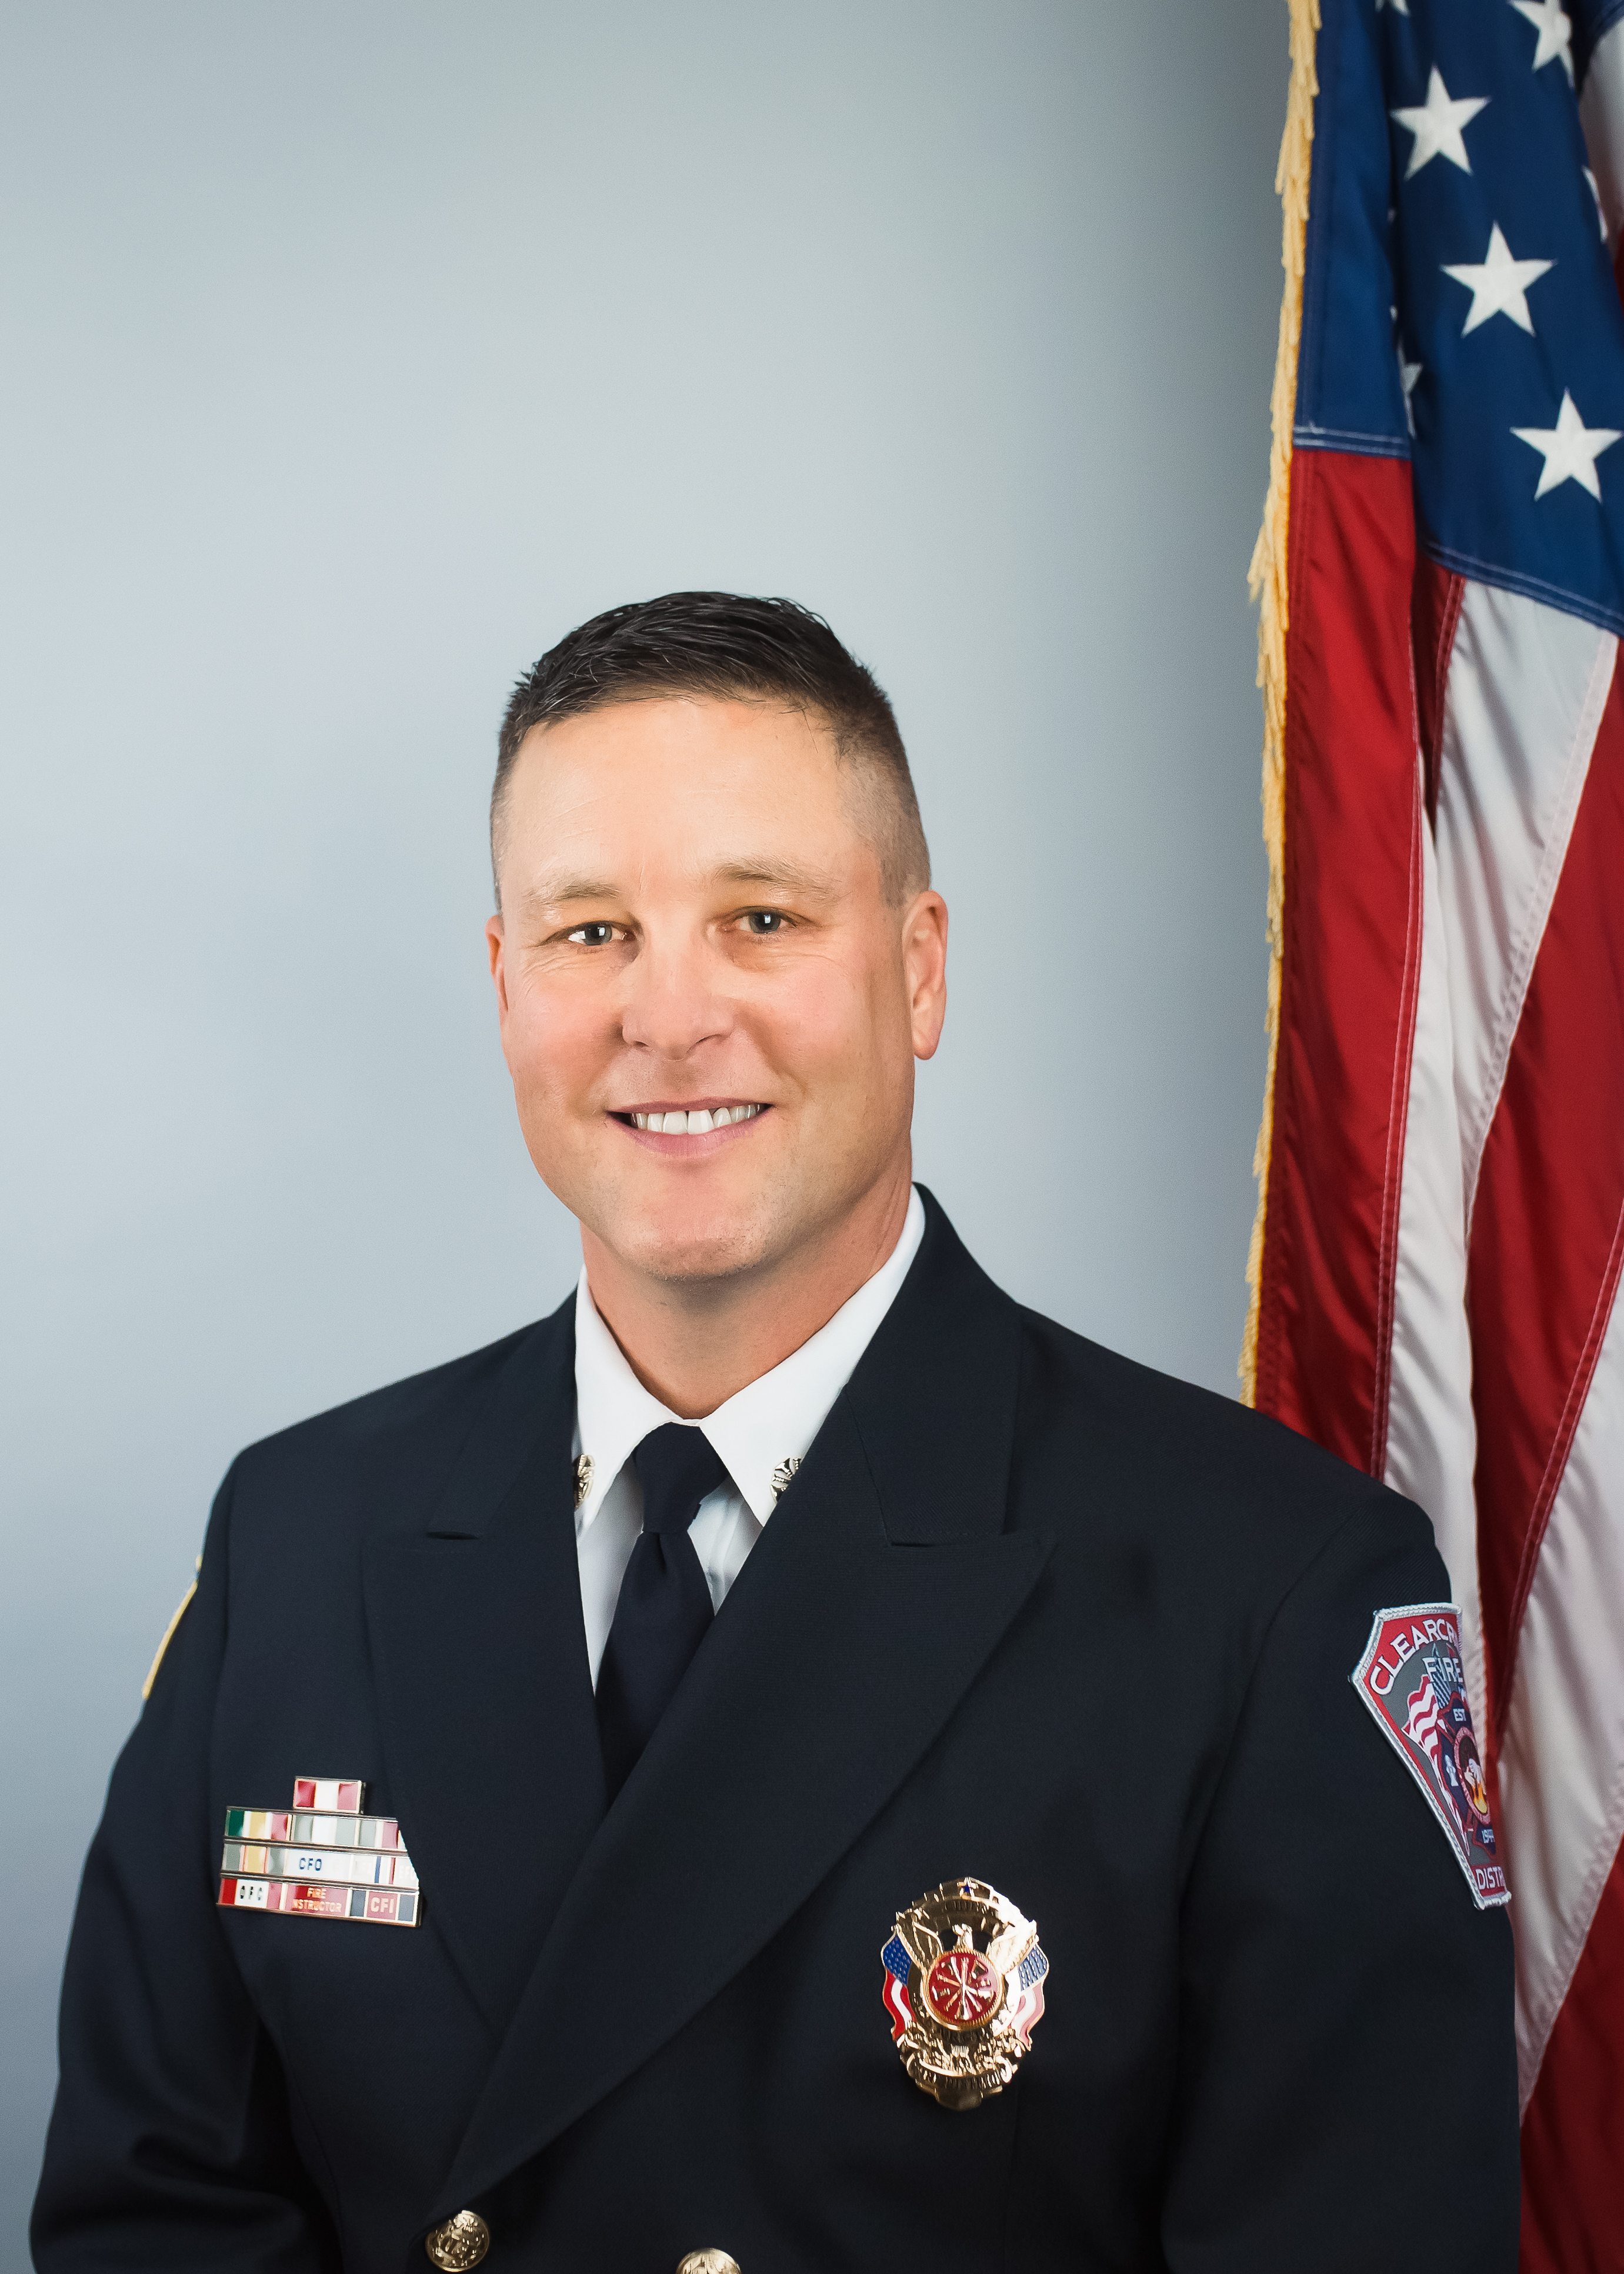 Chief Steve Agenbroad